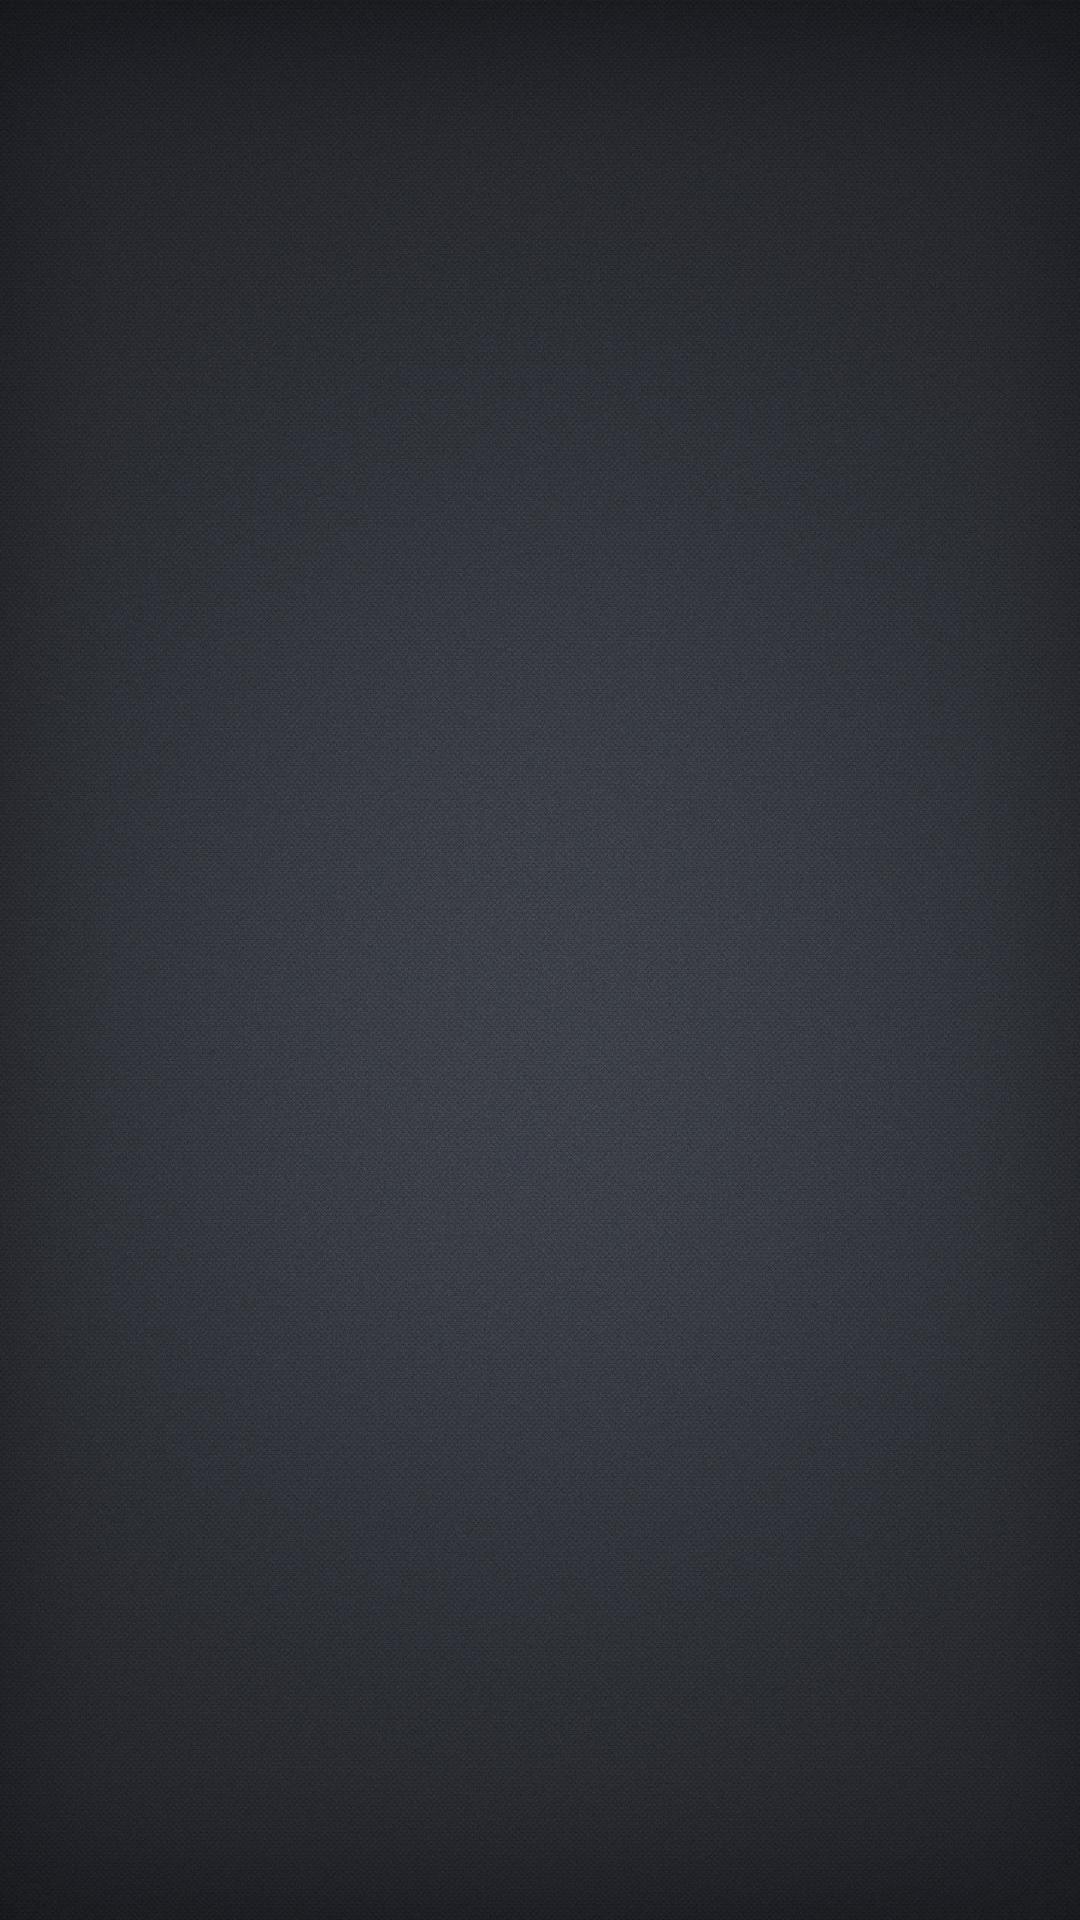 iOS 13 Wallpaper  Grey Light  Mobile Abyss